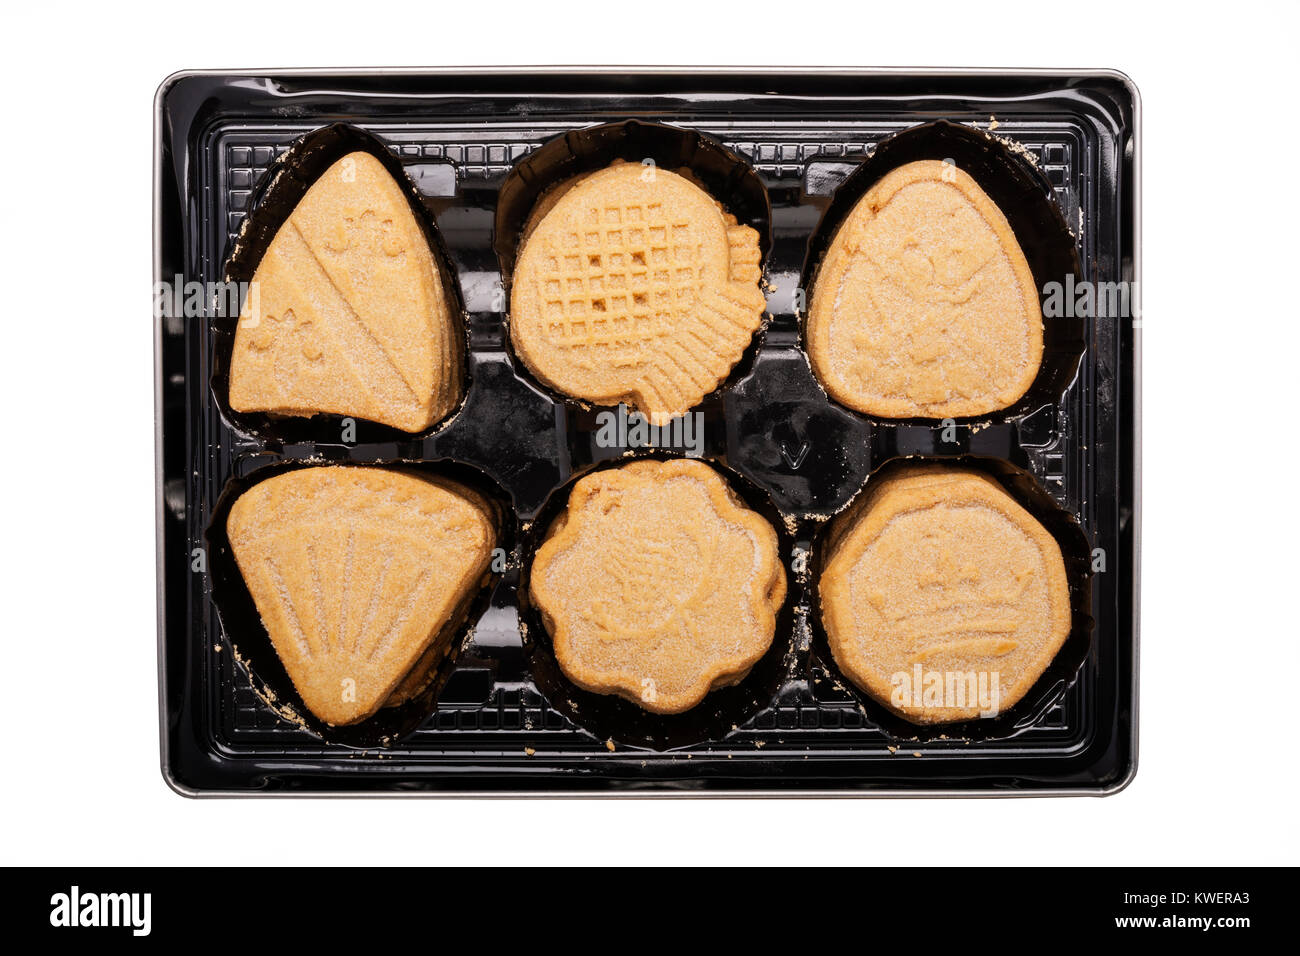 A tin of M&S all butter Shortbread  baked in Edinburgh on a white background Stock Photo